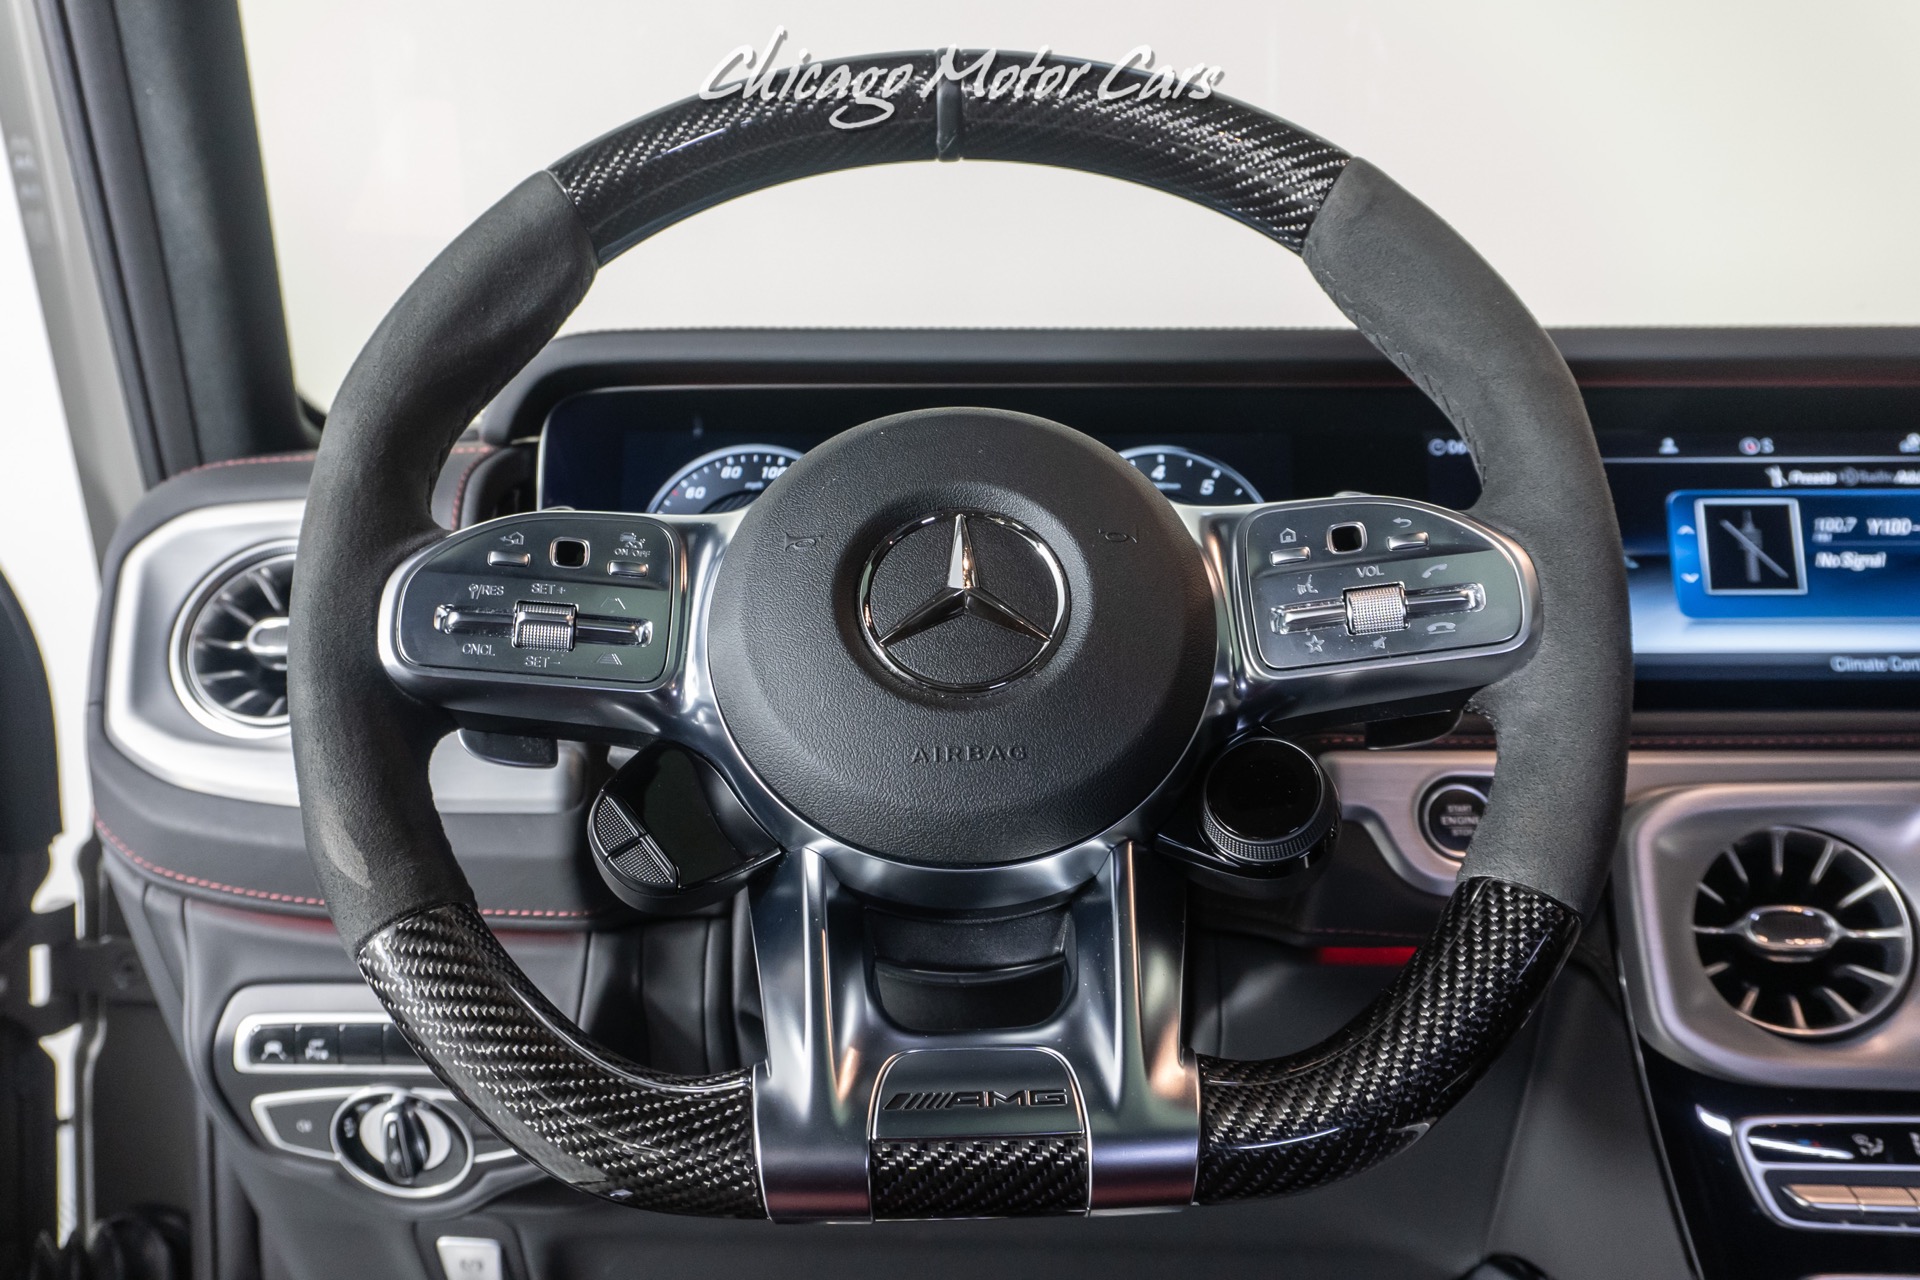 Used-2021-Mercedes-Benz-G-Class-AMG-G63-RARE-G-MANUFAKTUR-INTERIOR-PACKAGE-PLUS-AMG-NIGHT-PACKAGE-LOADED